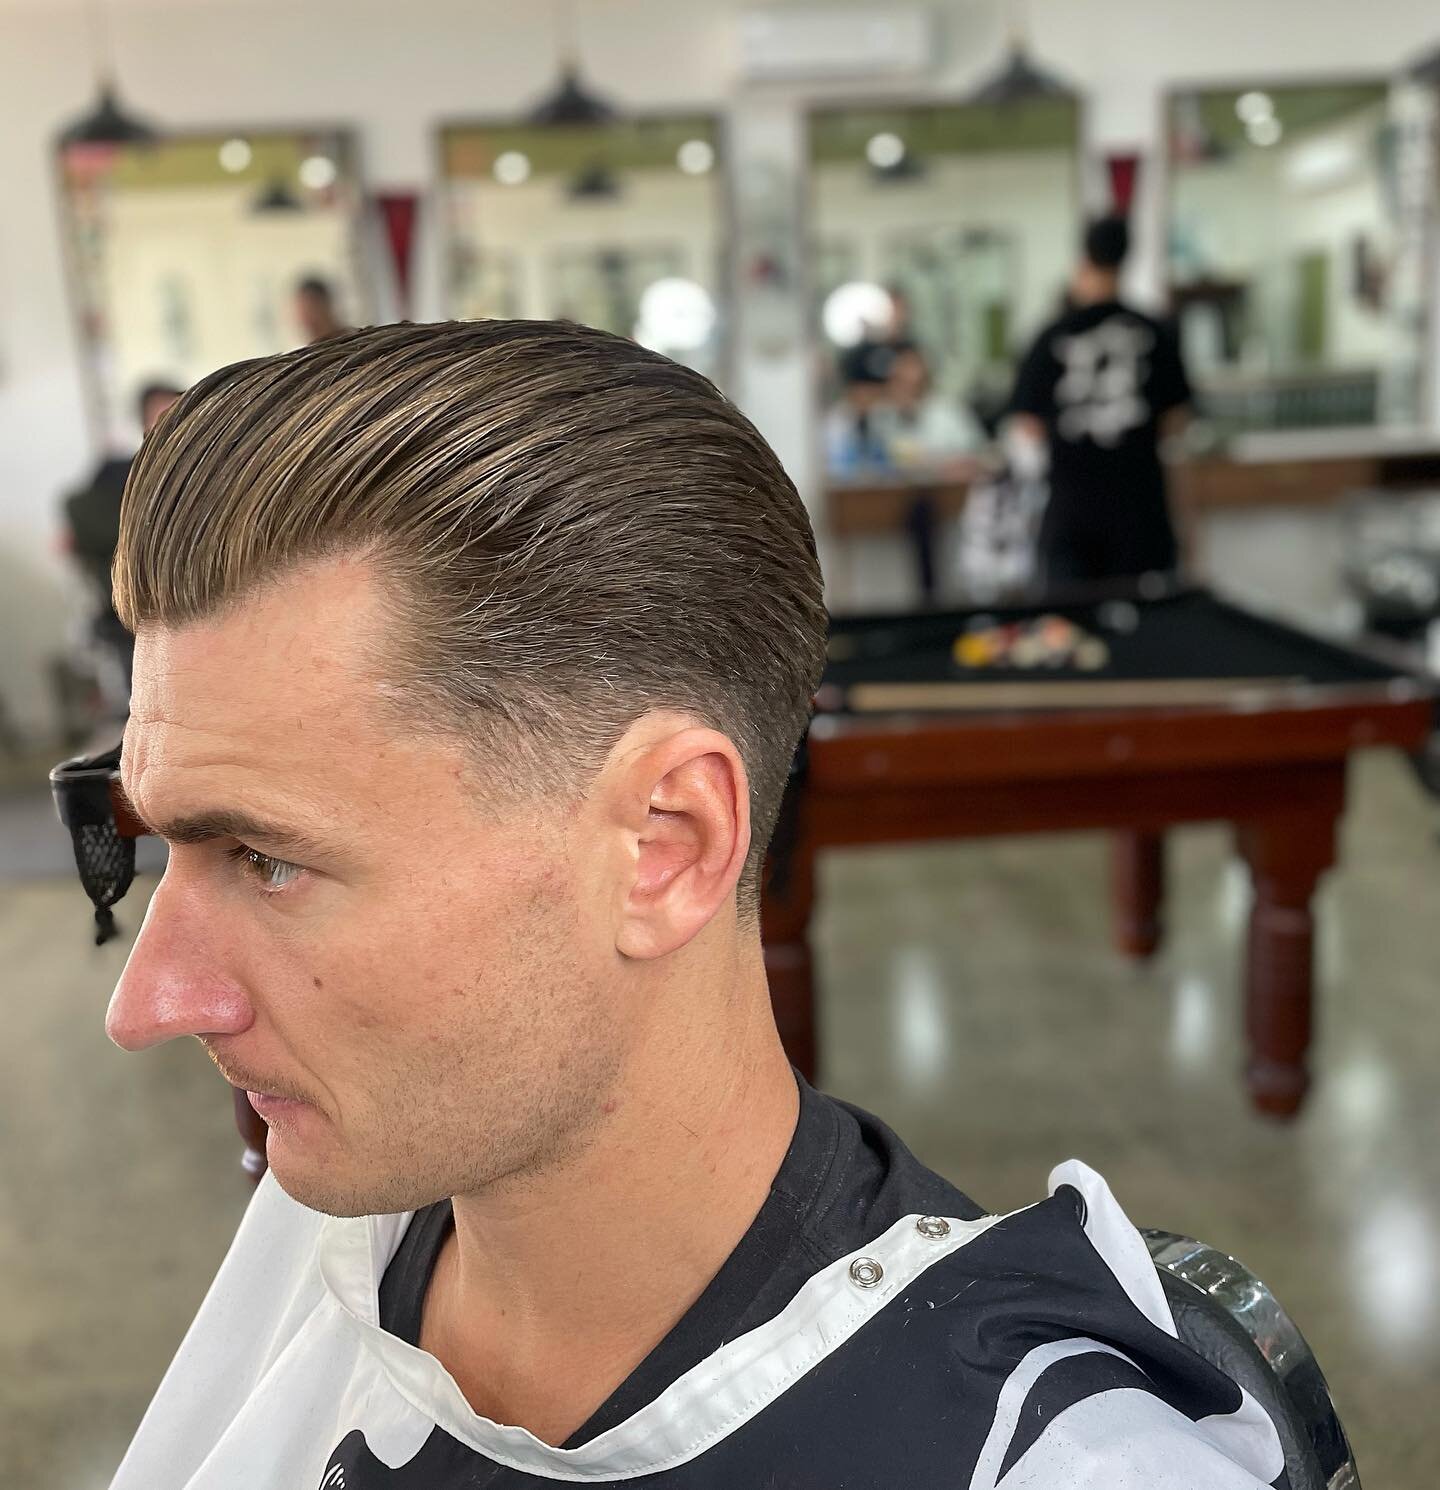 Start your week right and keep that taper tight! Book your next appointment online or call the shop to secure your spot ⚡️

Just a little bit of @uppercutdeluxe sea salt spray was all this one needed after @the_rolling_barber was done with it! 🔥 

A